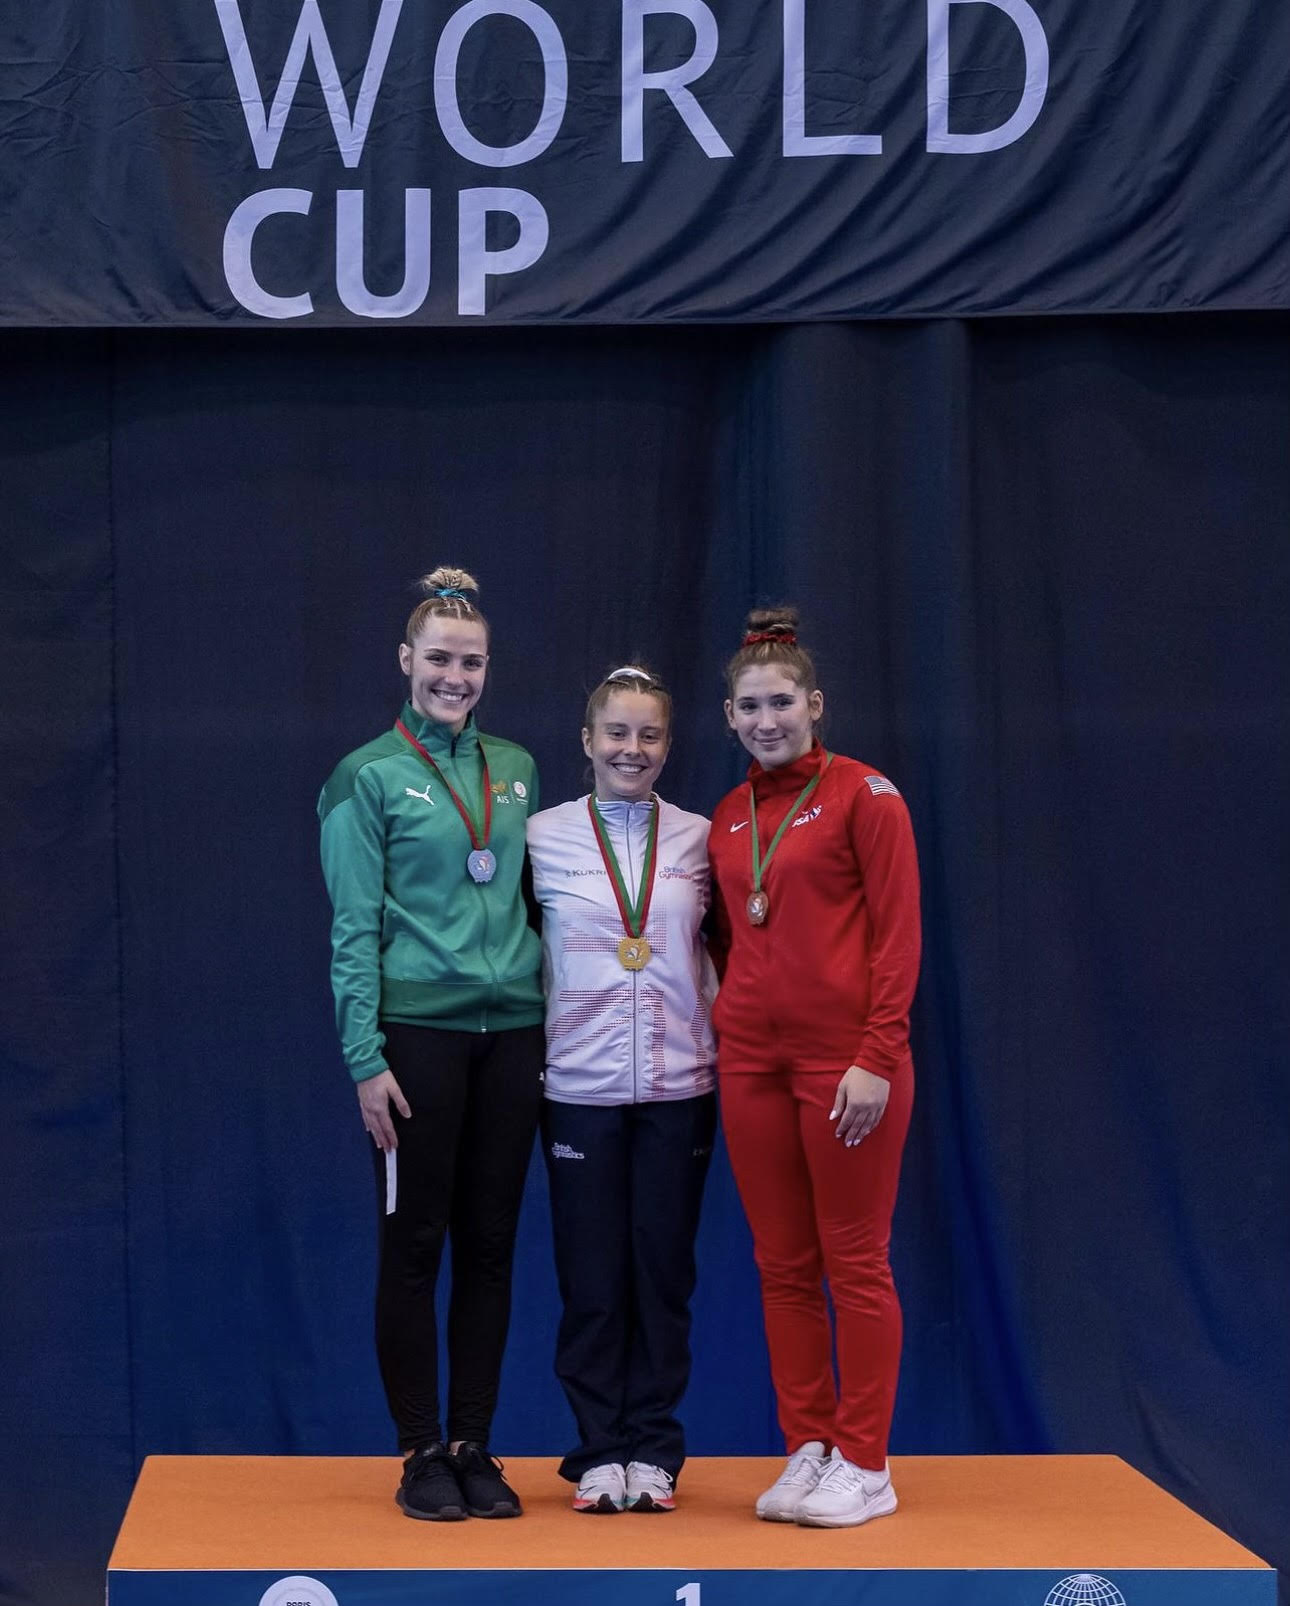 Kent stands with first and second place medalists Kristy Way (GBR) and Cheyanna Robinson (AUS) at the Trampoline World Cup in Coimbra, Portugal.